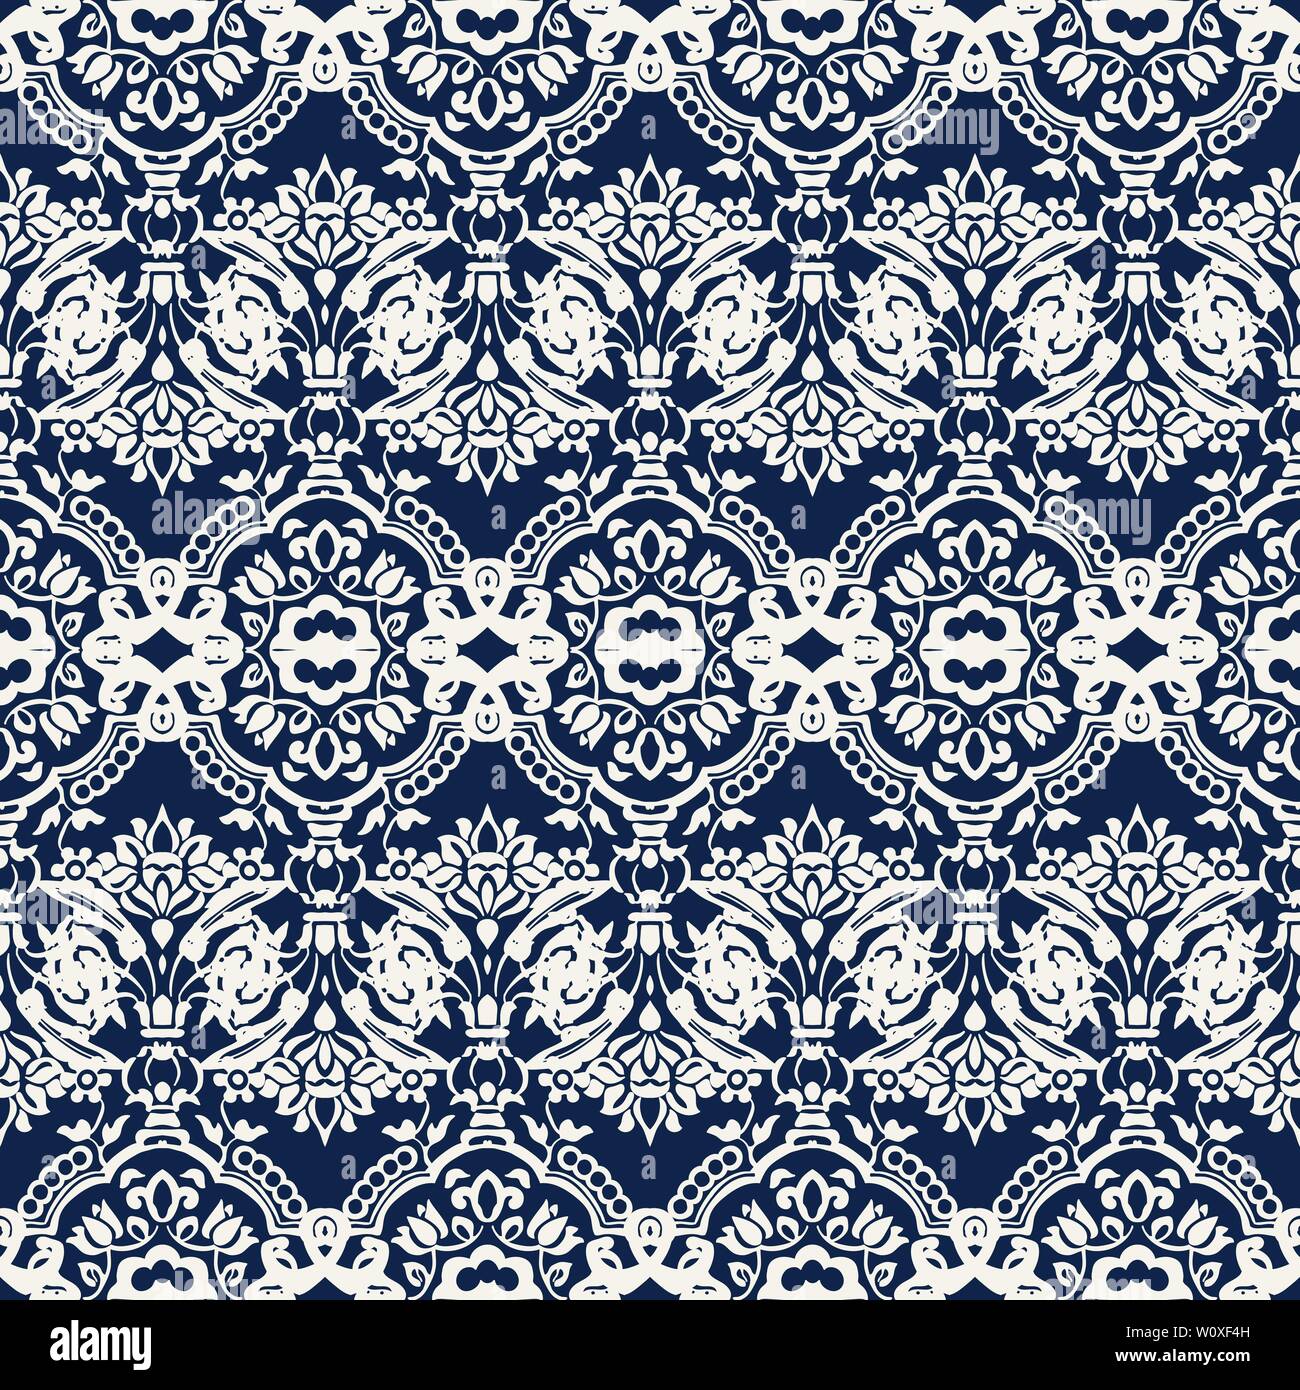 Indigo dye woodblock printed seamless ethnic floral damask pattern. Traditional oriental ornament of India with exotic flowers, ecru on navy blue Stock Vector